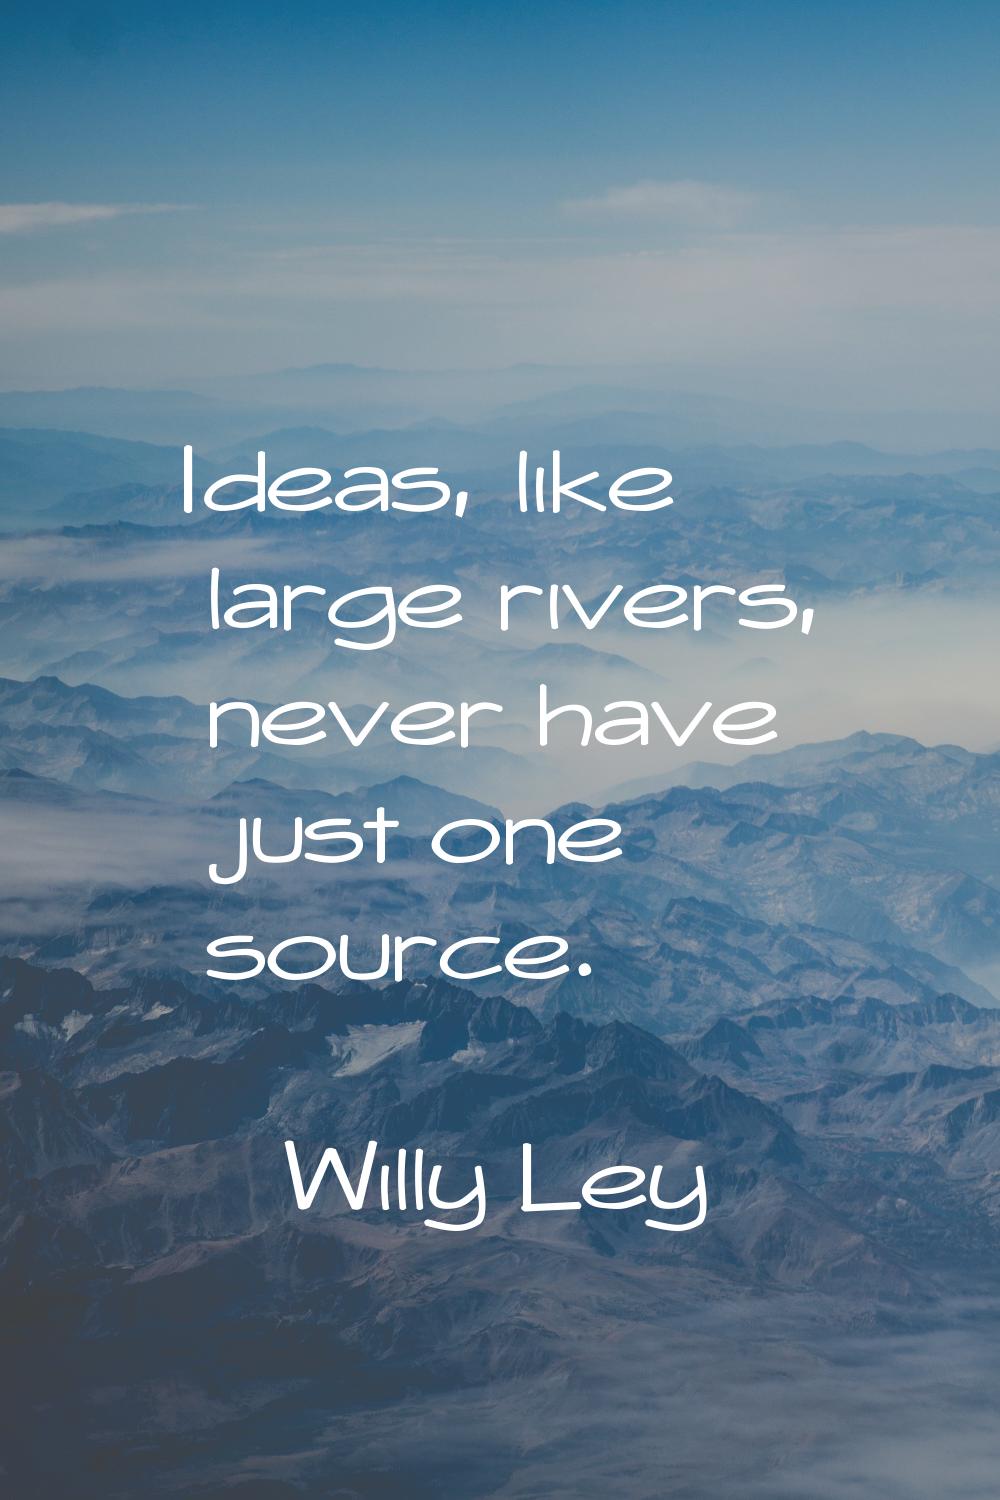 Ideas, like large rivers, never have just one source.